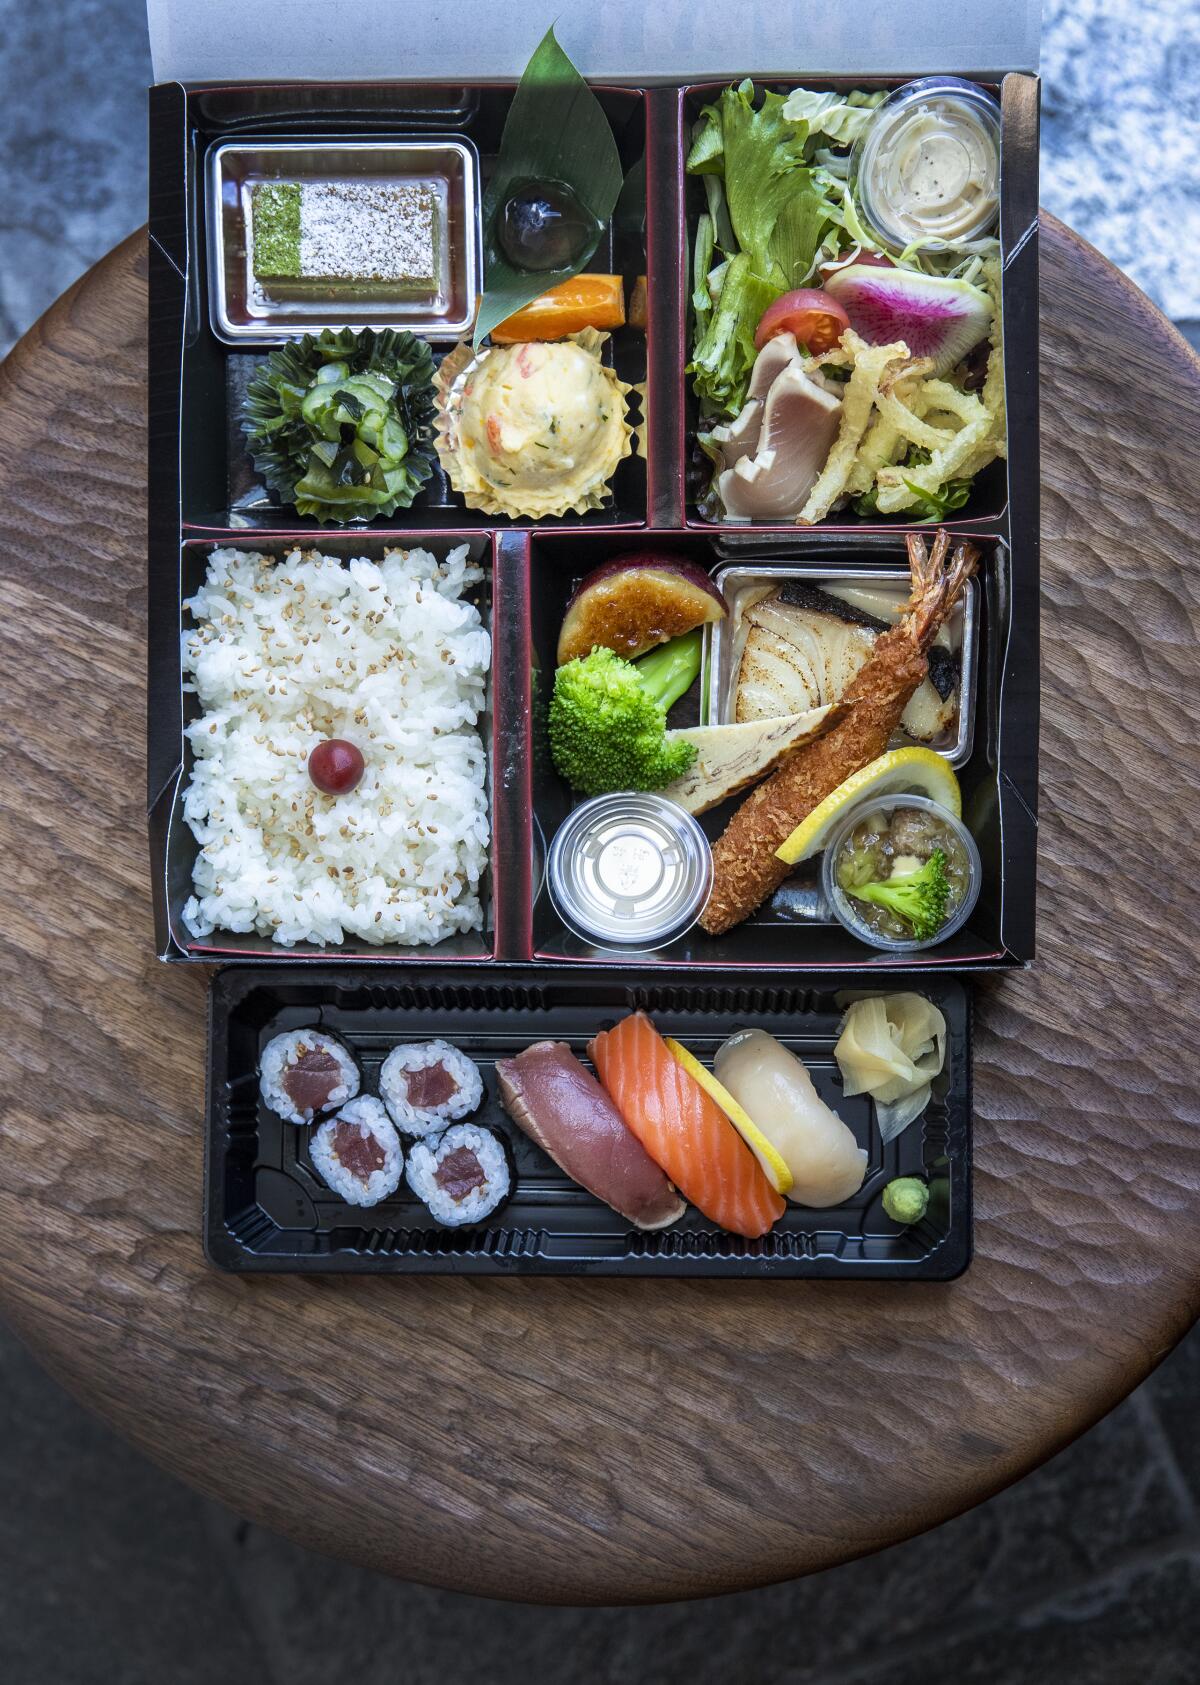 n/naka's $38 bento box with sushi and an assortment of Japanese comfort foods.